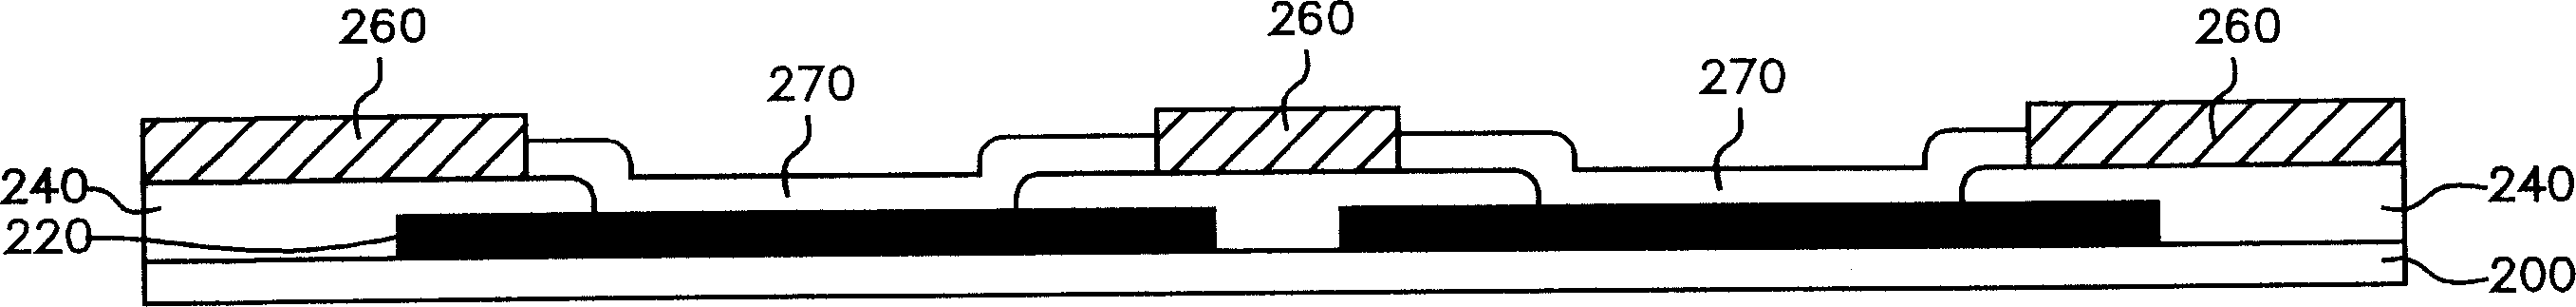 Structure of package using coupling and its forming method